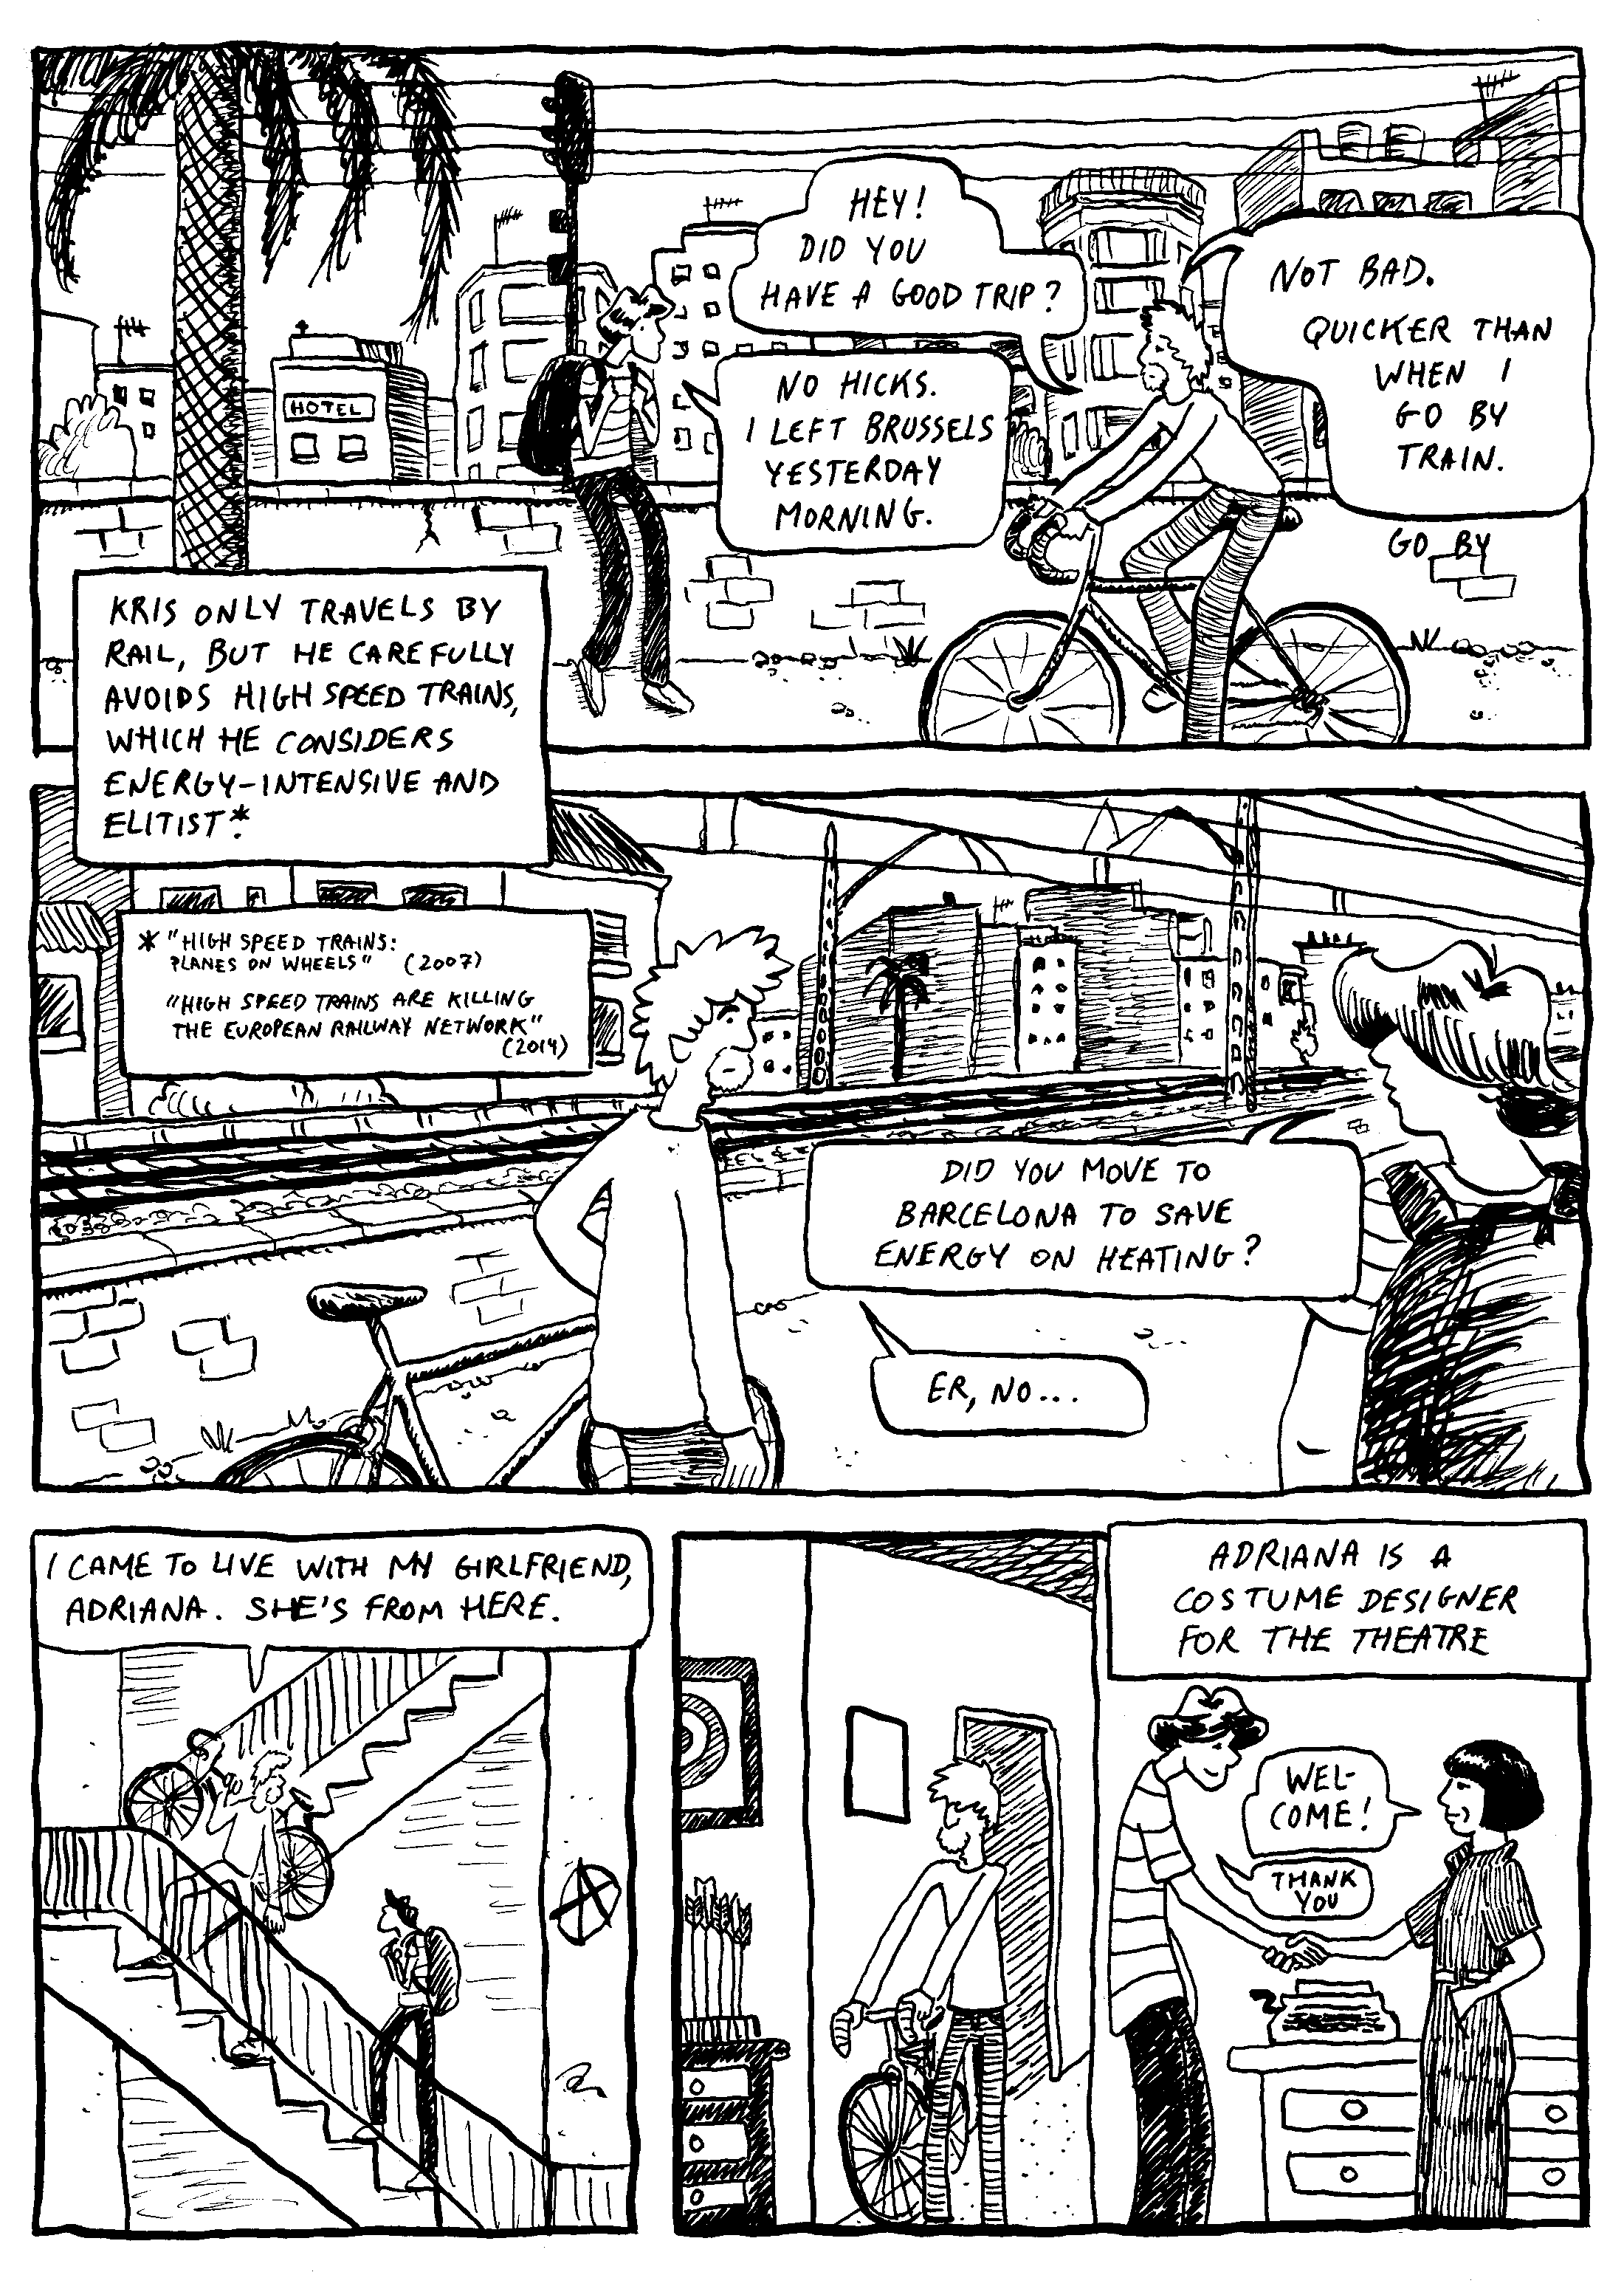 Page 3 of the Comic &ldquo;Back to the future of technology&rdquo; by Guillaume Lion